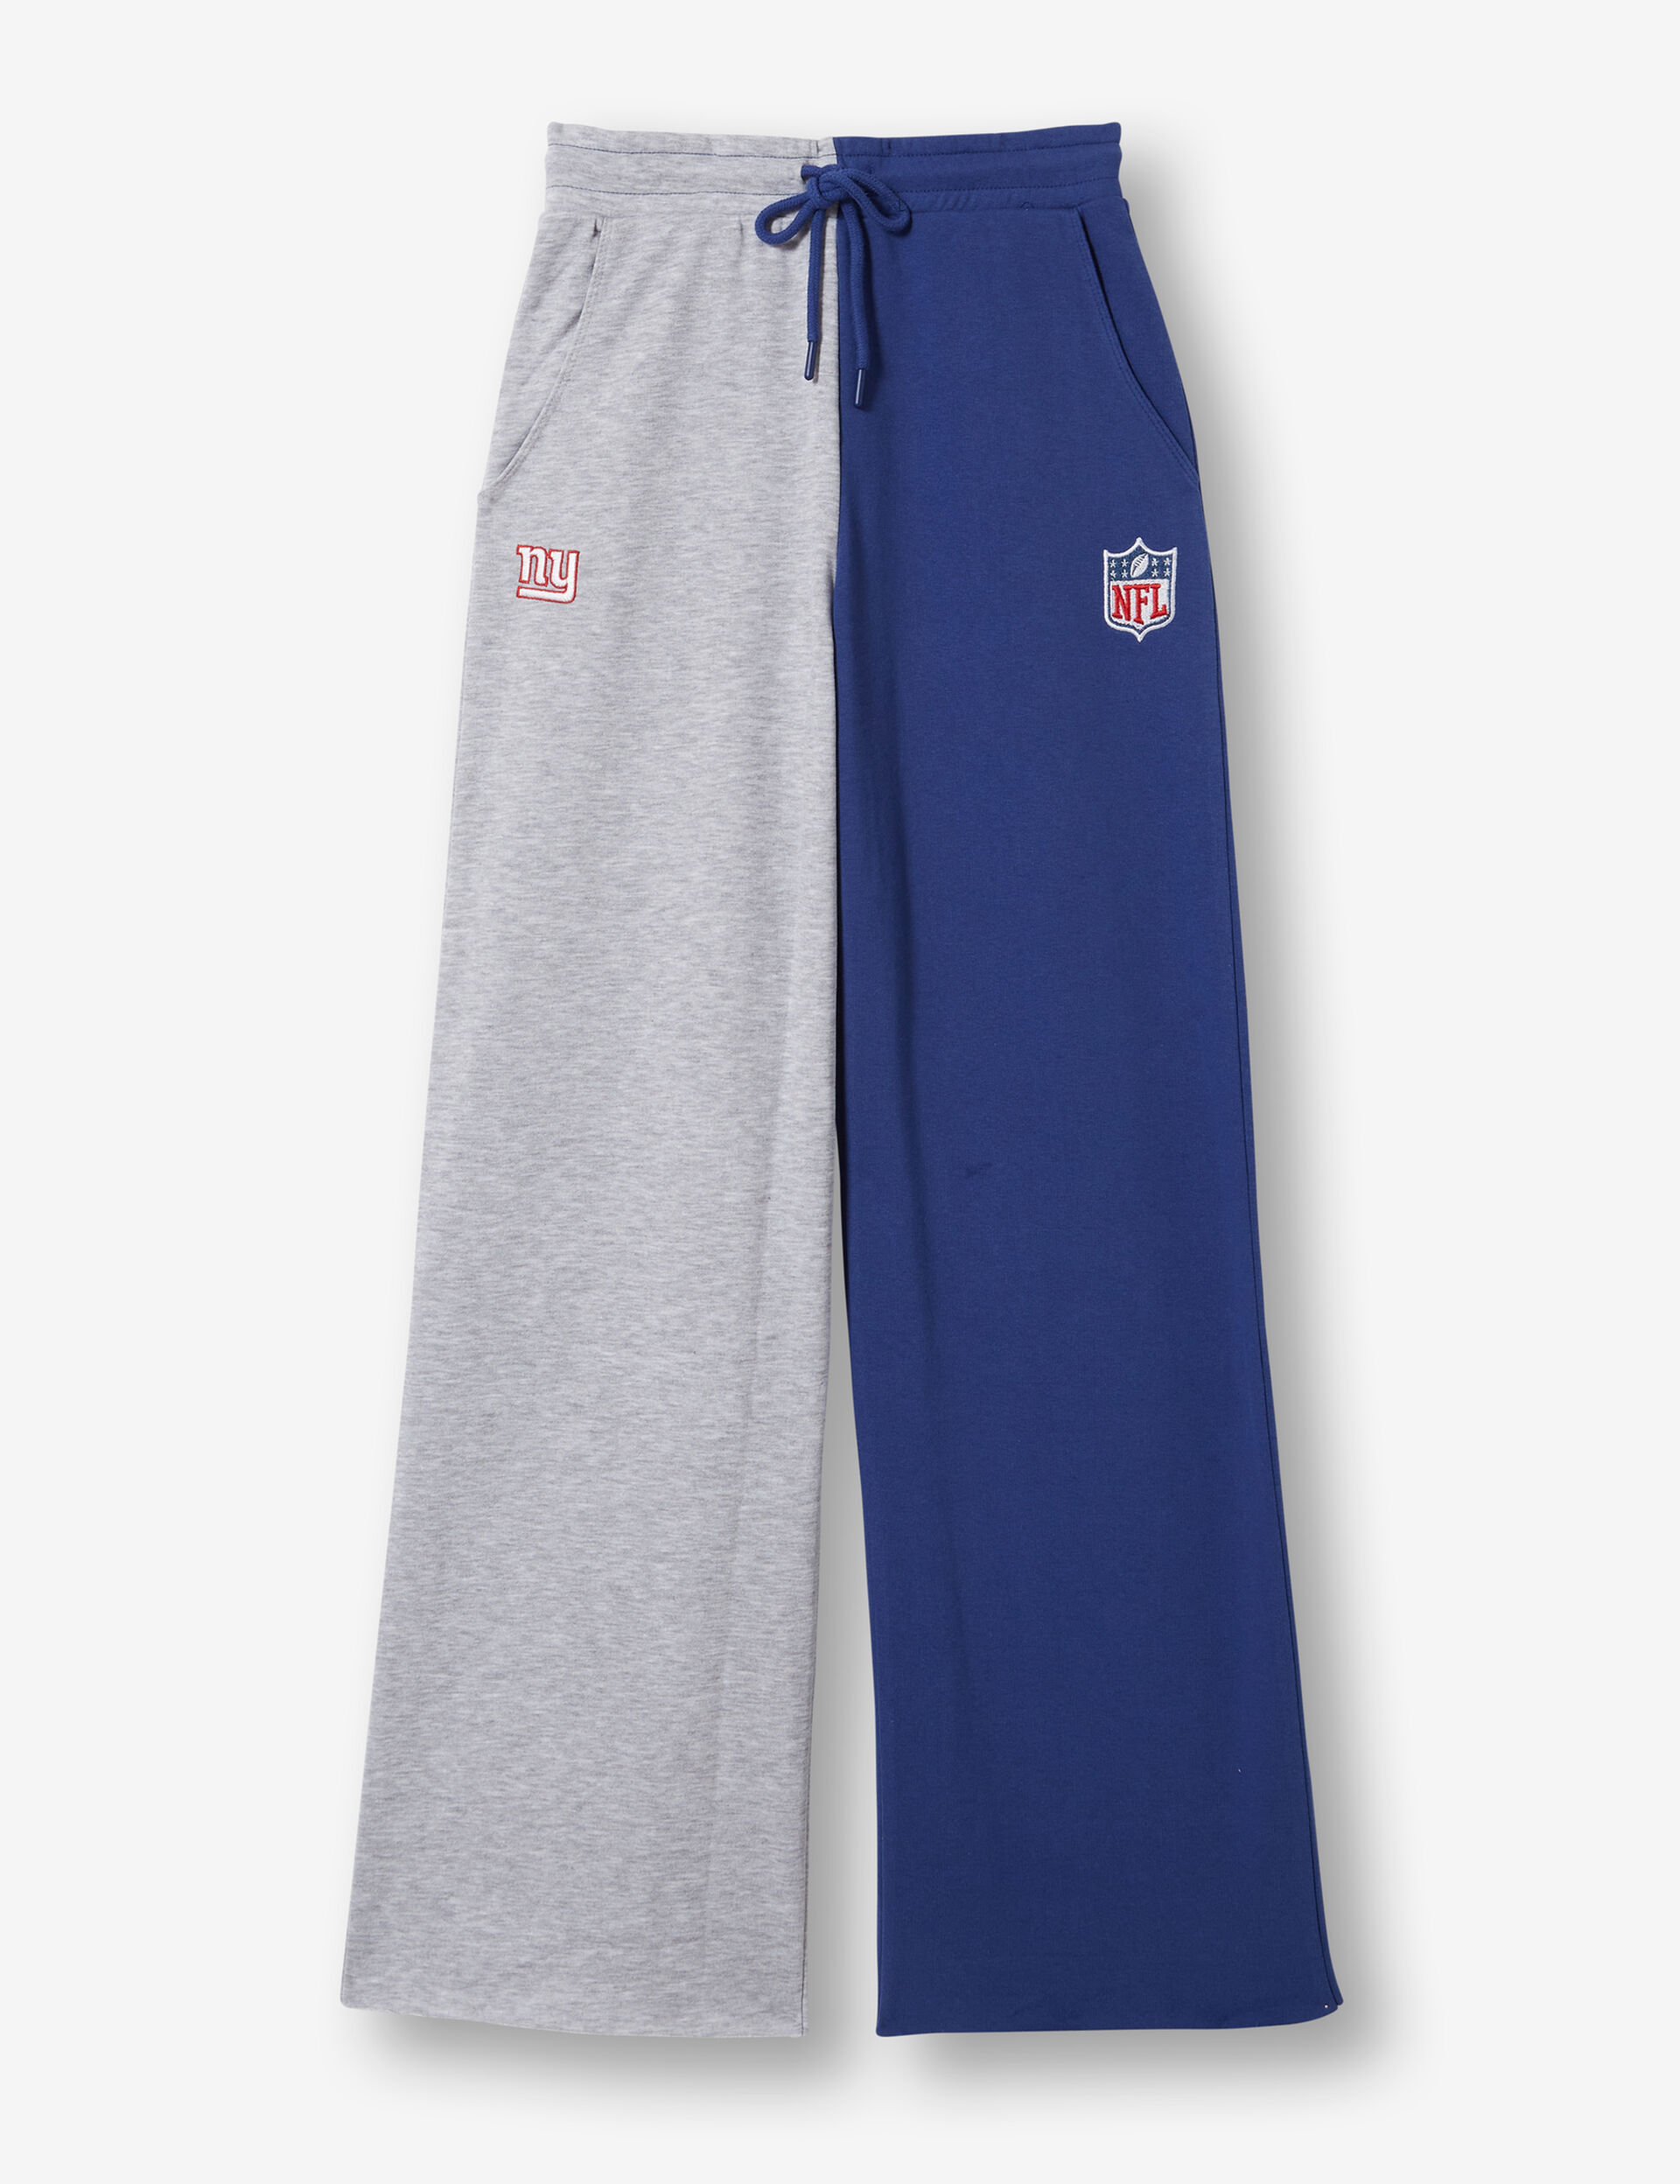 Two-tone NFL joggers